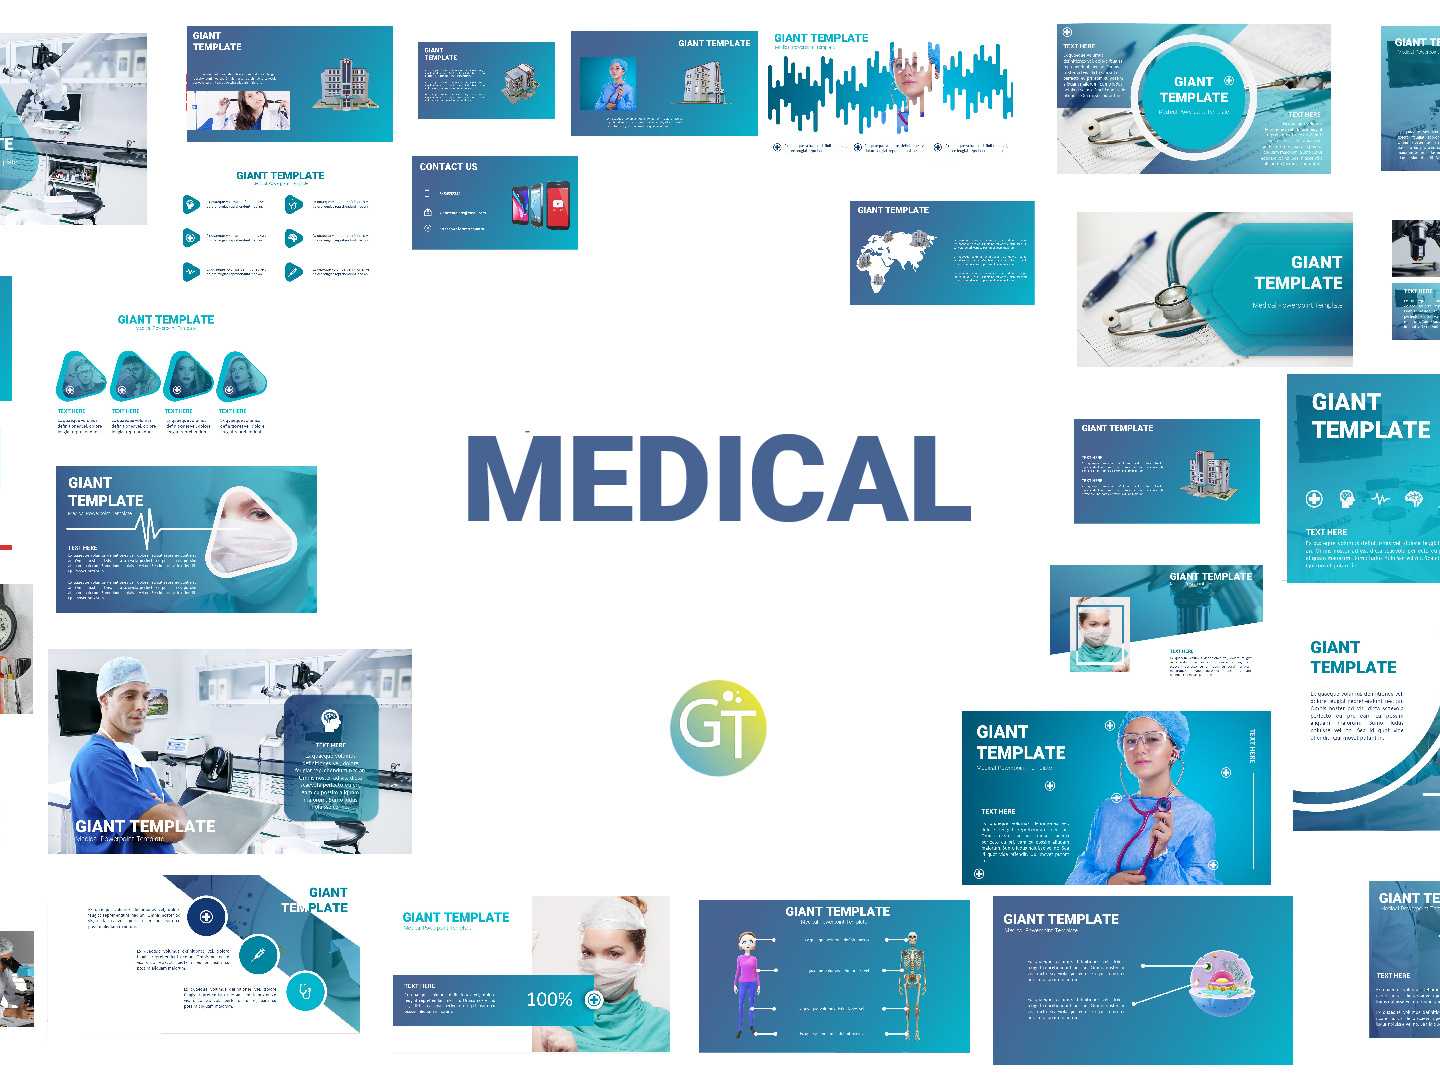 Medical Powerpoint Templates Free Downloadgiant Template Inside Powerpoint Sample Templates Free Download